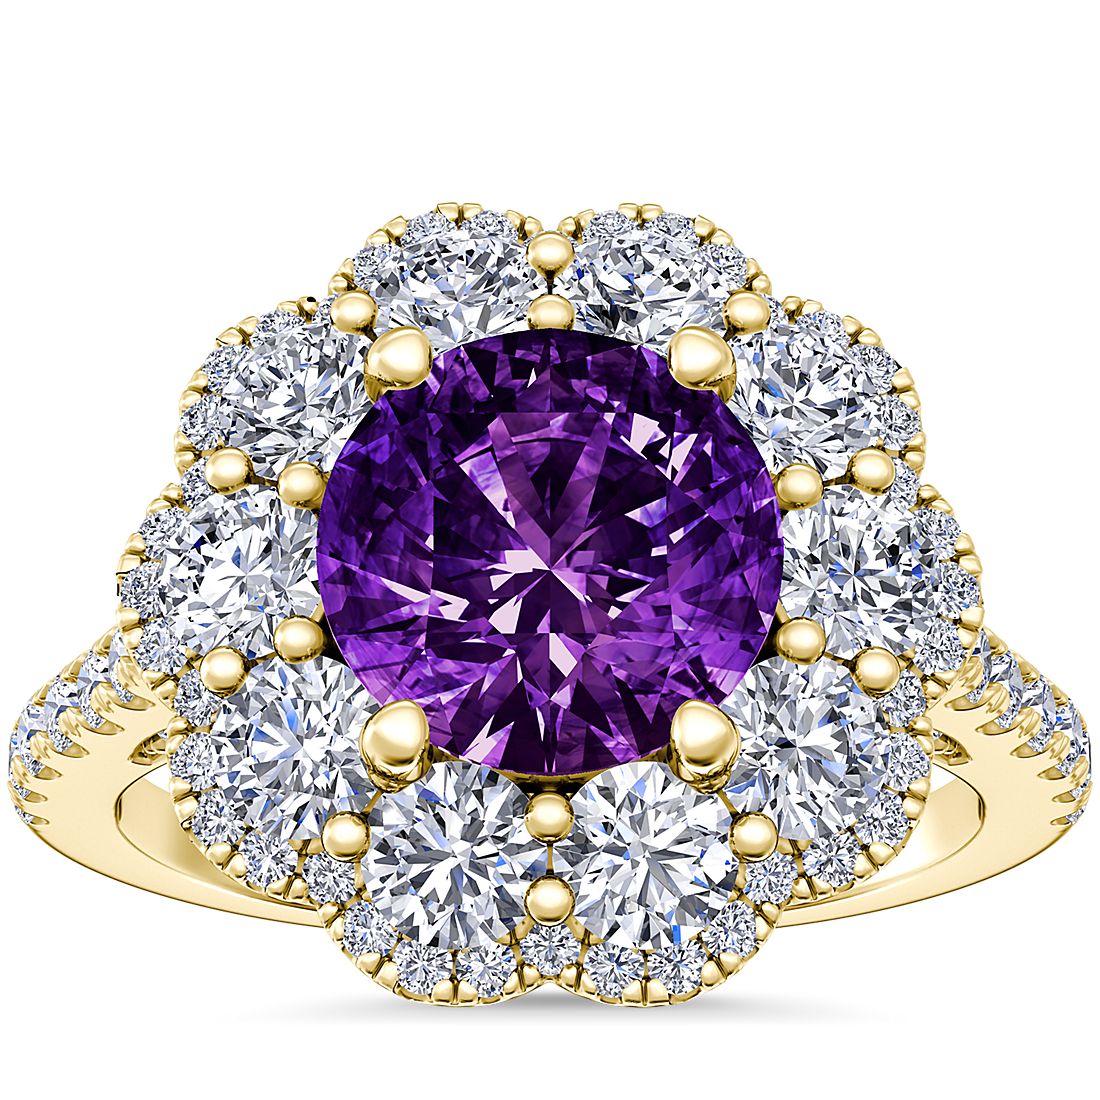 Vintage Diamond Halo Engagement Ring with Round Amethyst in 14k Yellow Gold (8mm)